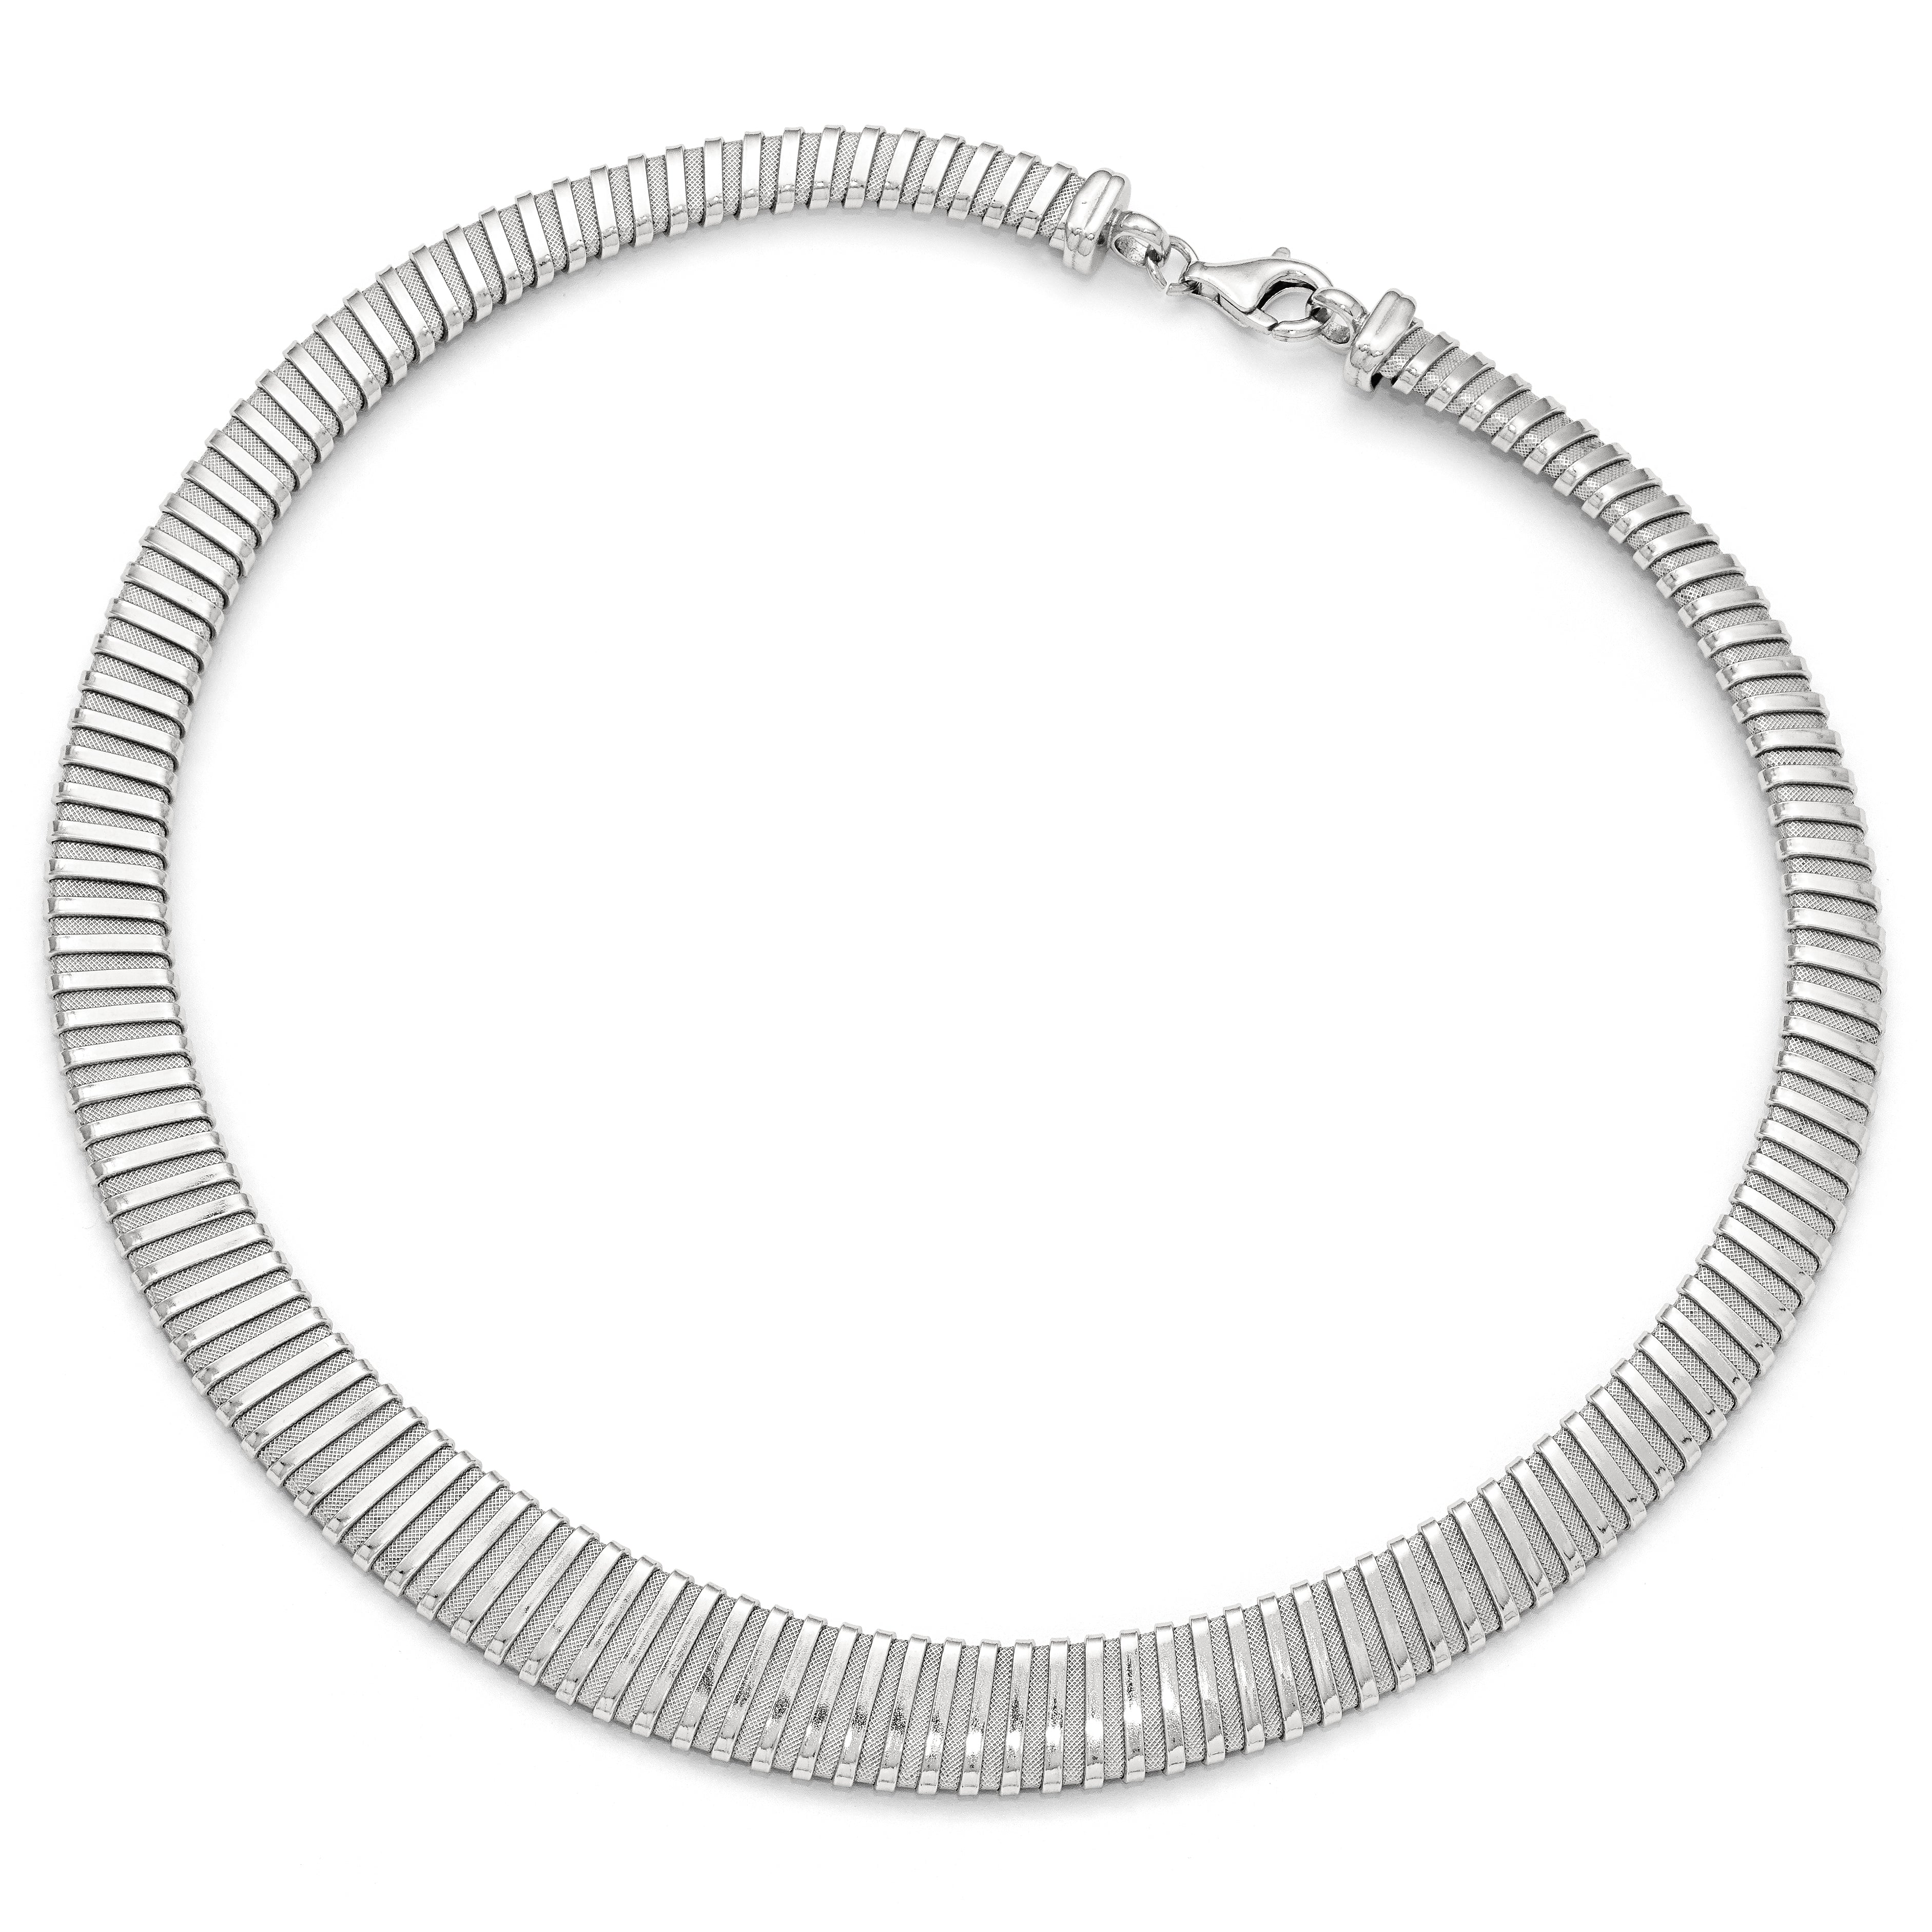 Sterling Silver Polished and Textured Necklace